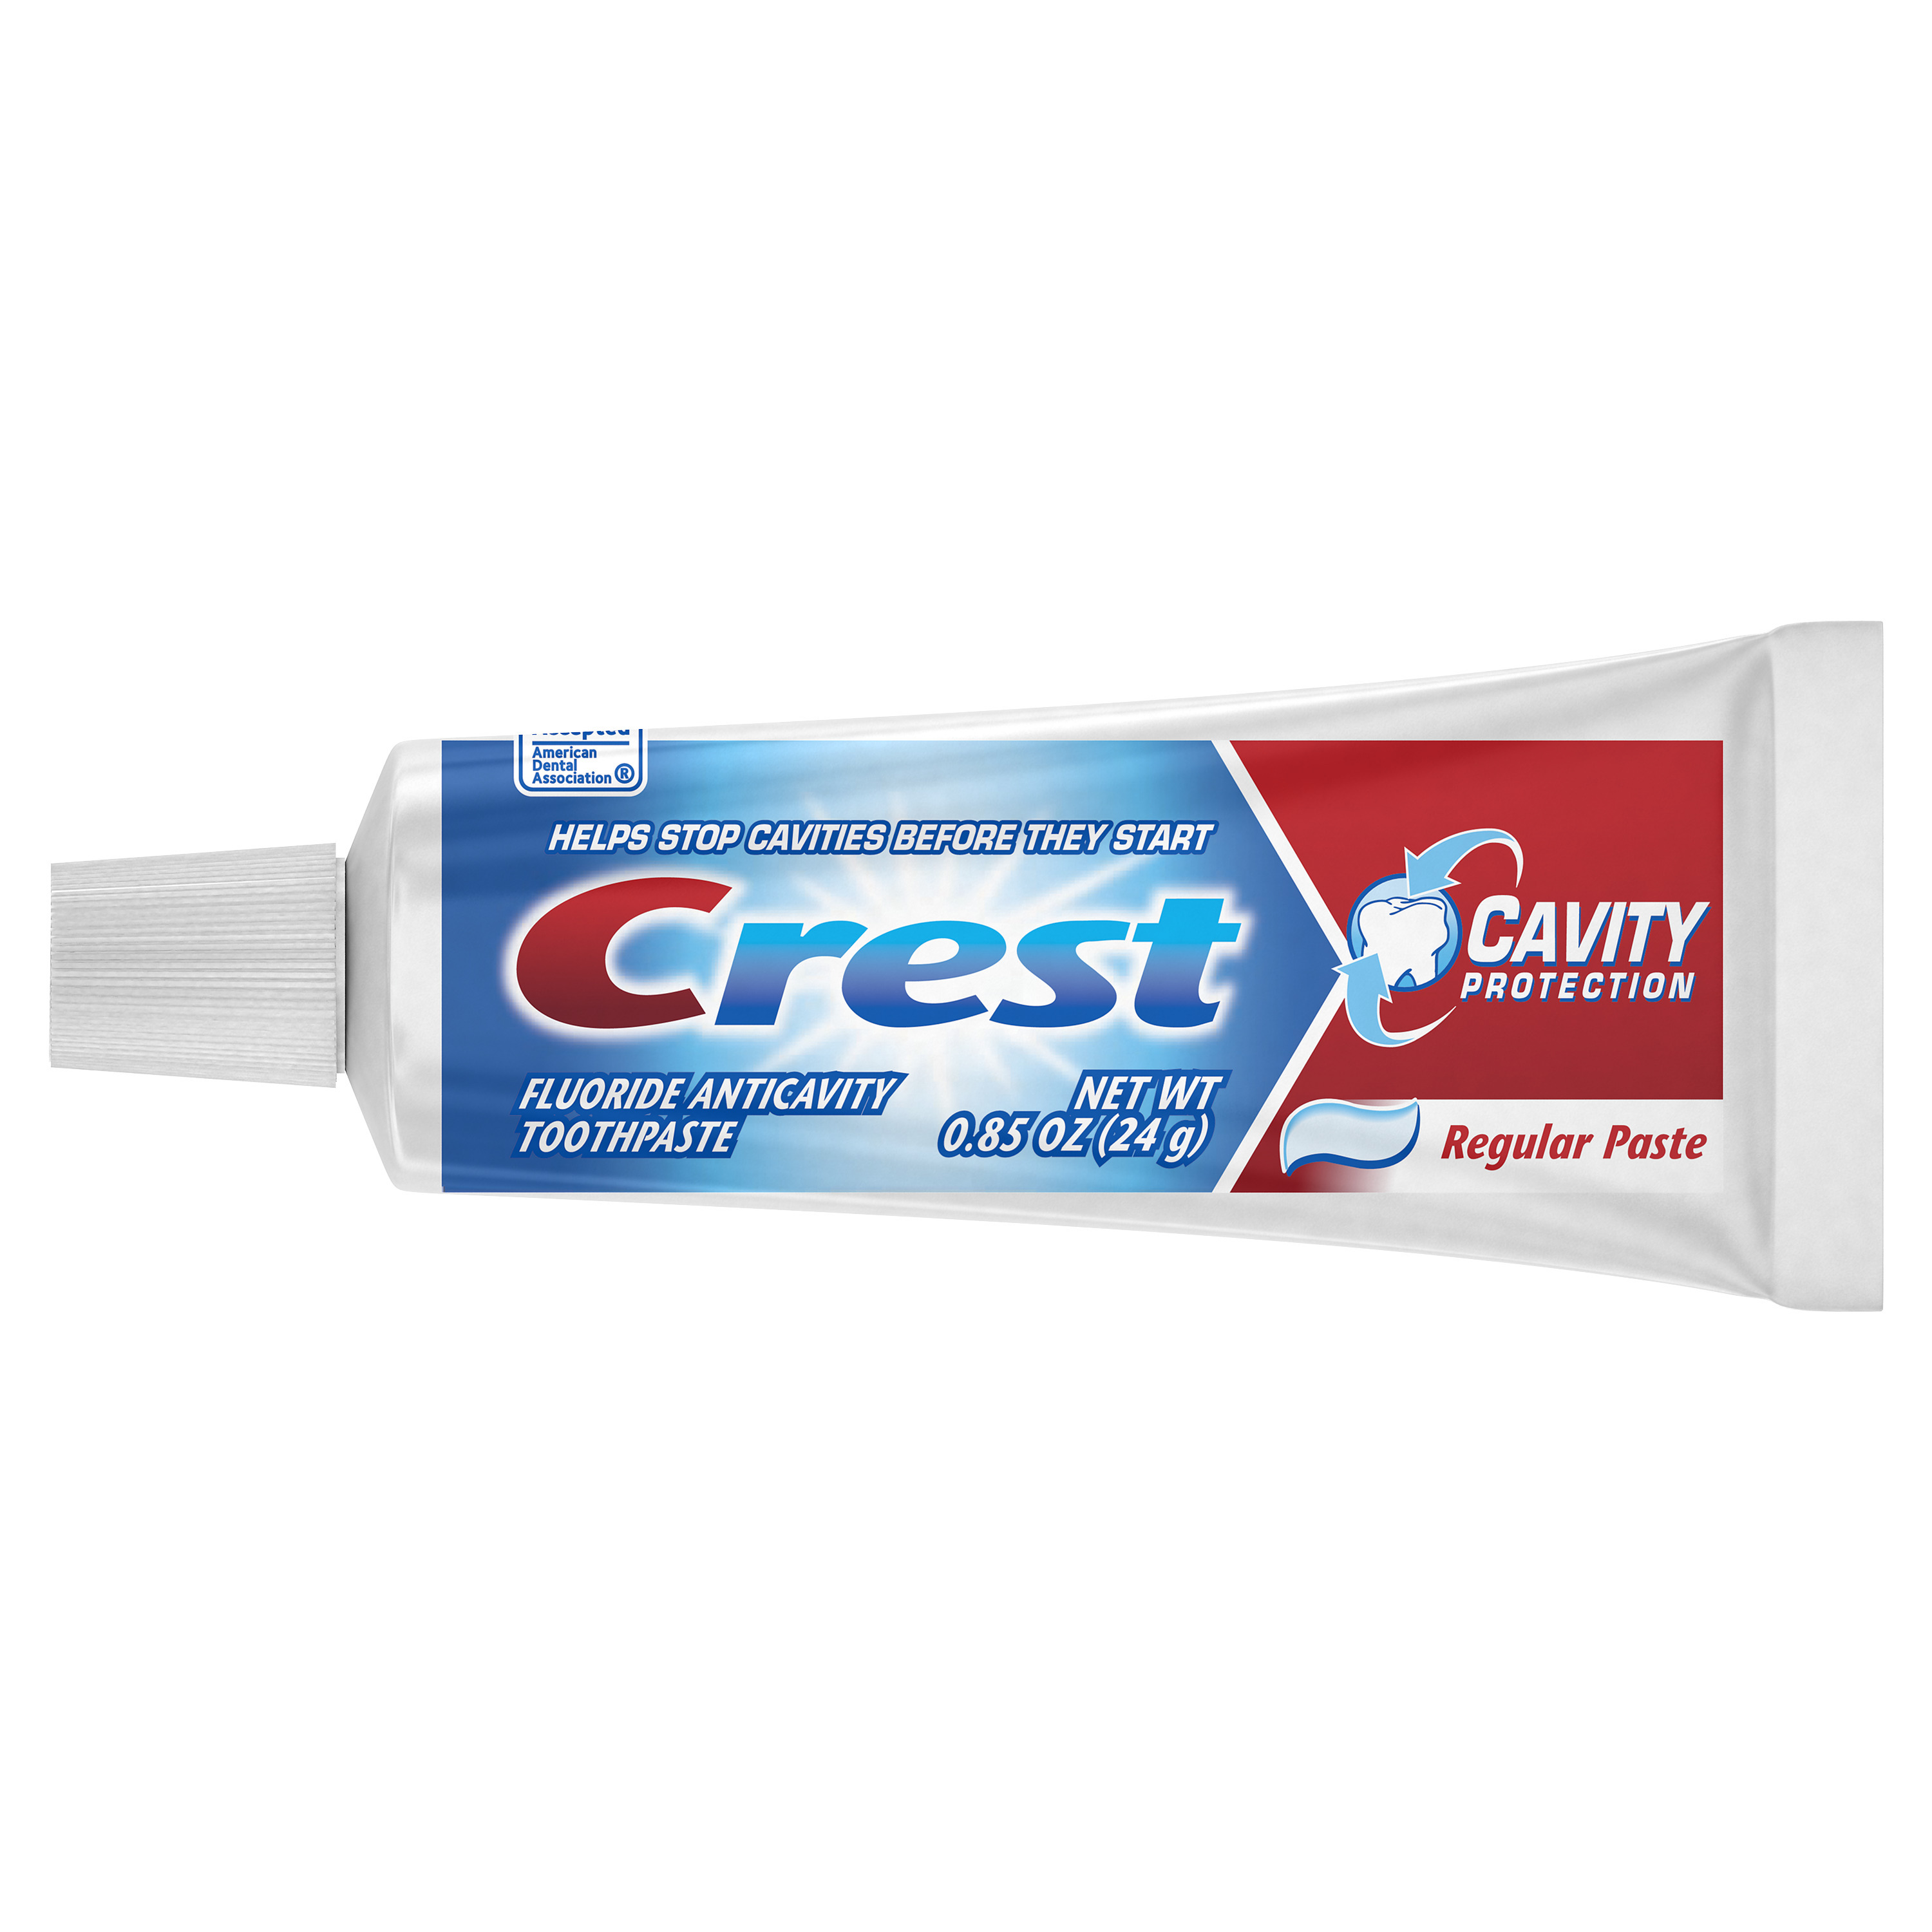 Crest Cavity Protection Toothpaste, Regular, 0.85 oz - image 3 of 5